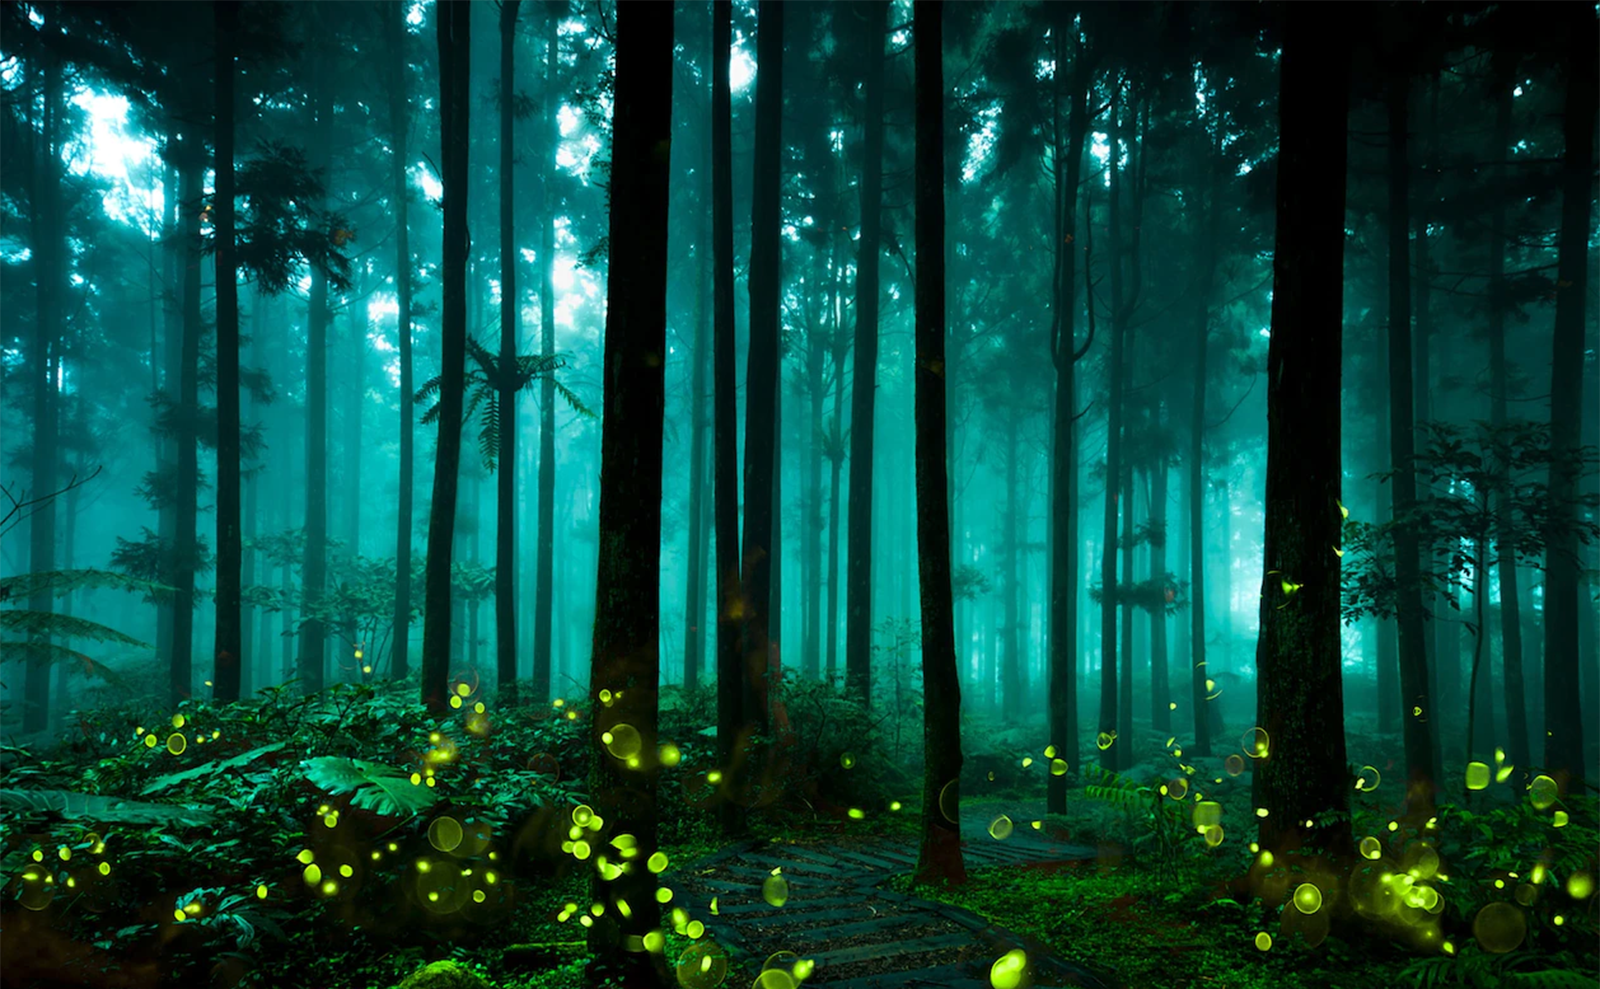  fireflies in the forest in taichung, taiwan